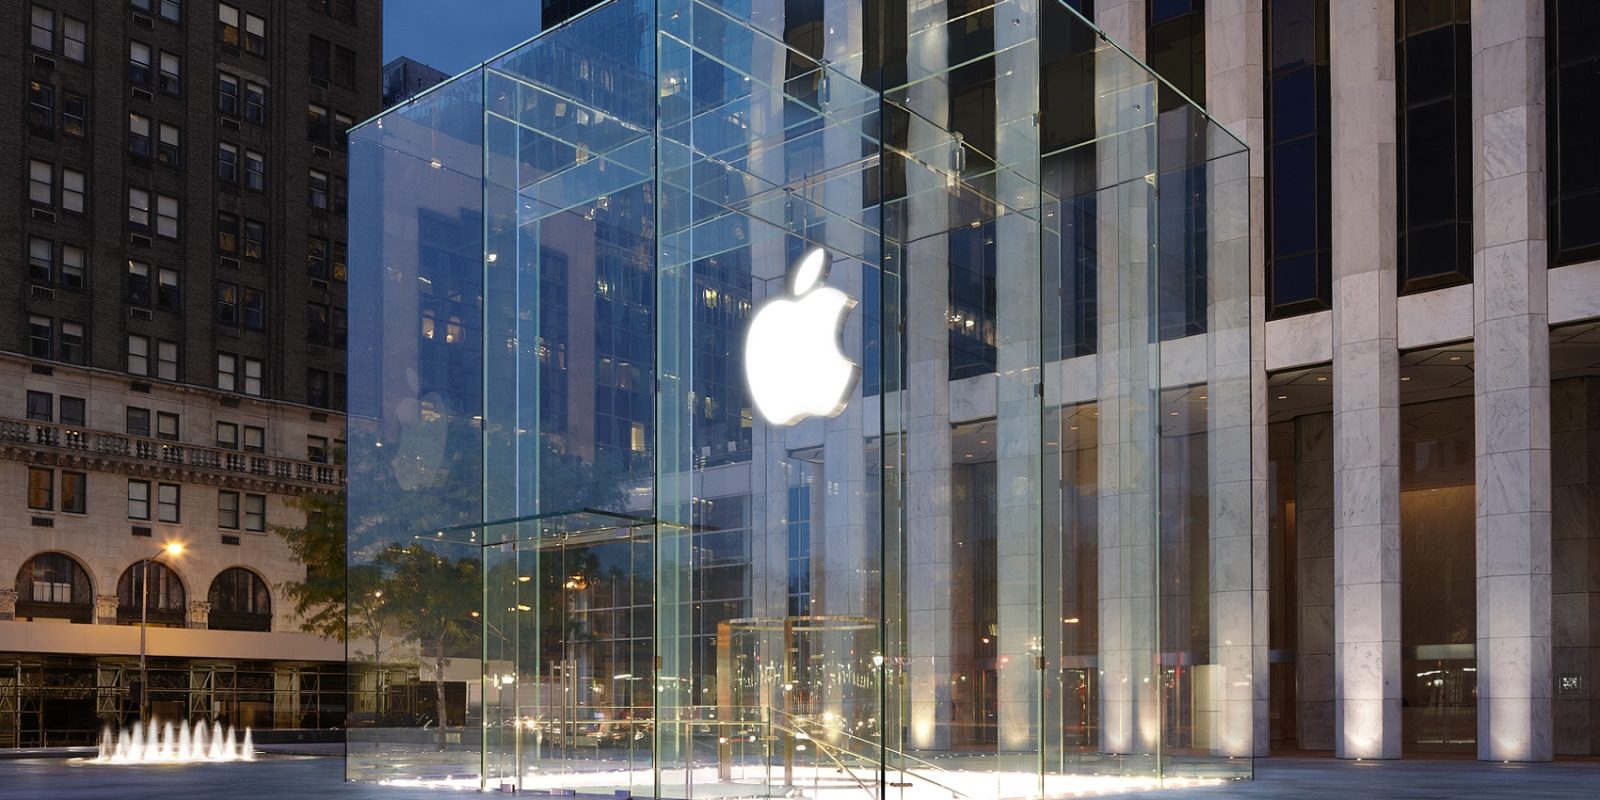 Apple’s Redesigned Fifth Avenue Retail Store to Reopen Around Nov. 2018